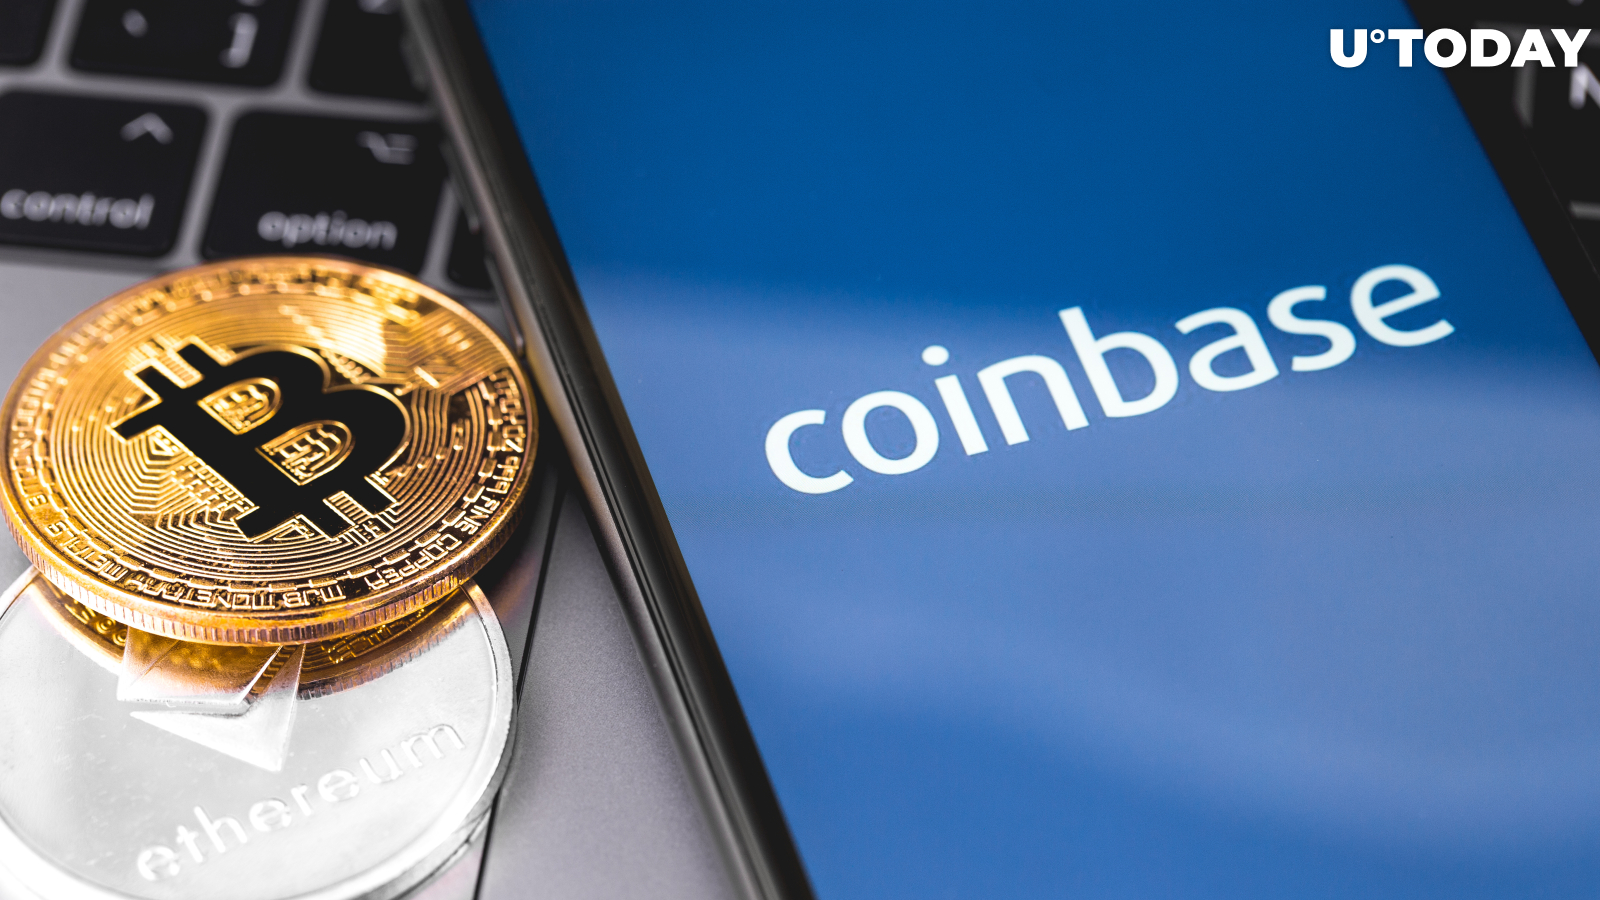 Here's When Coinbase Is Going to Have Its Direct Listing